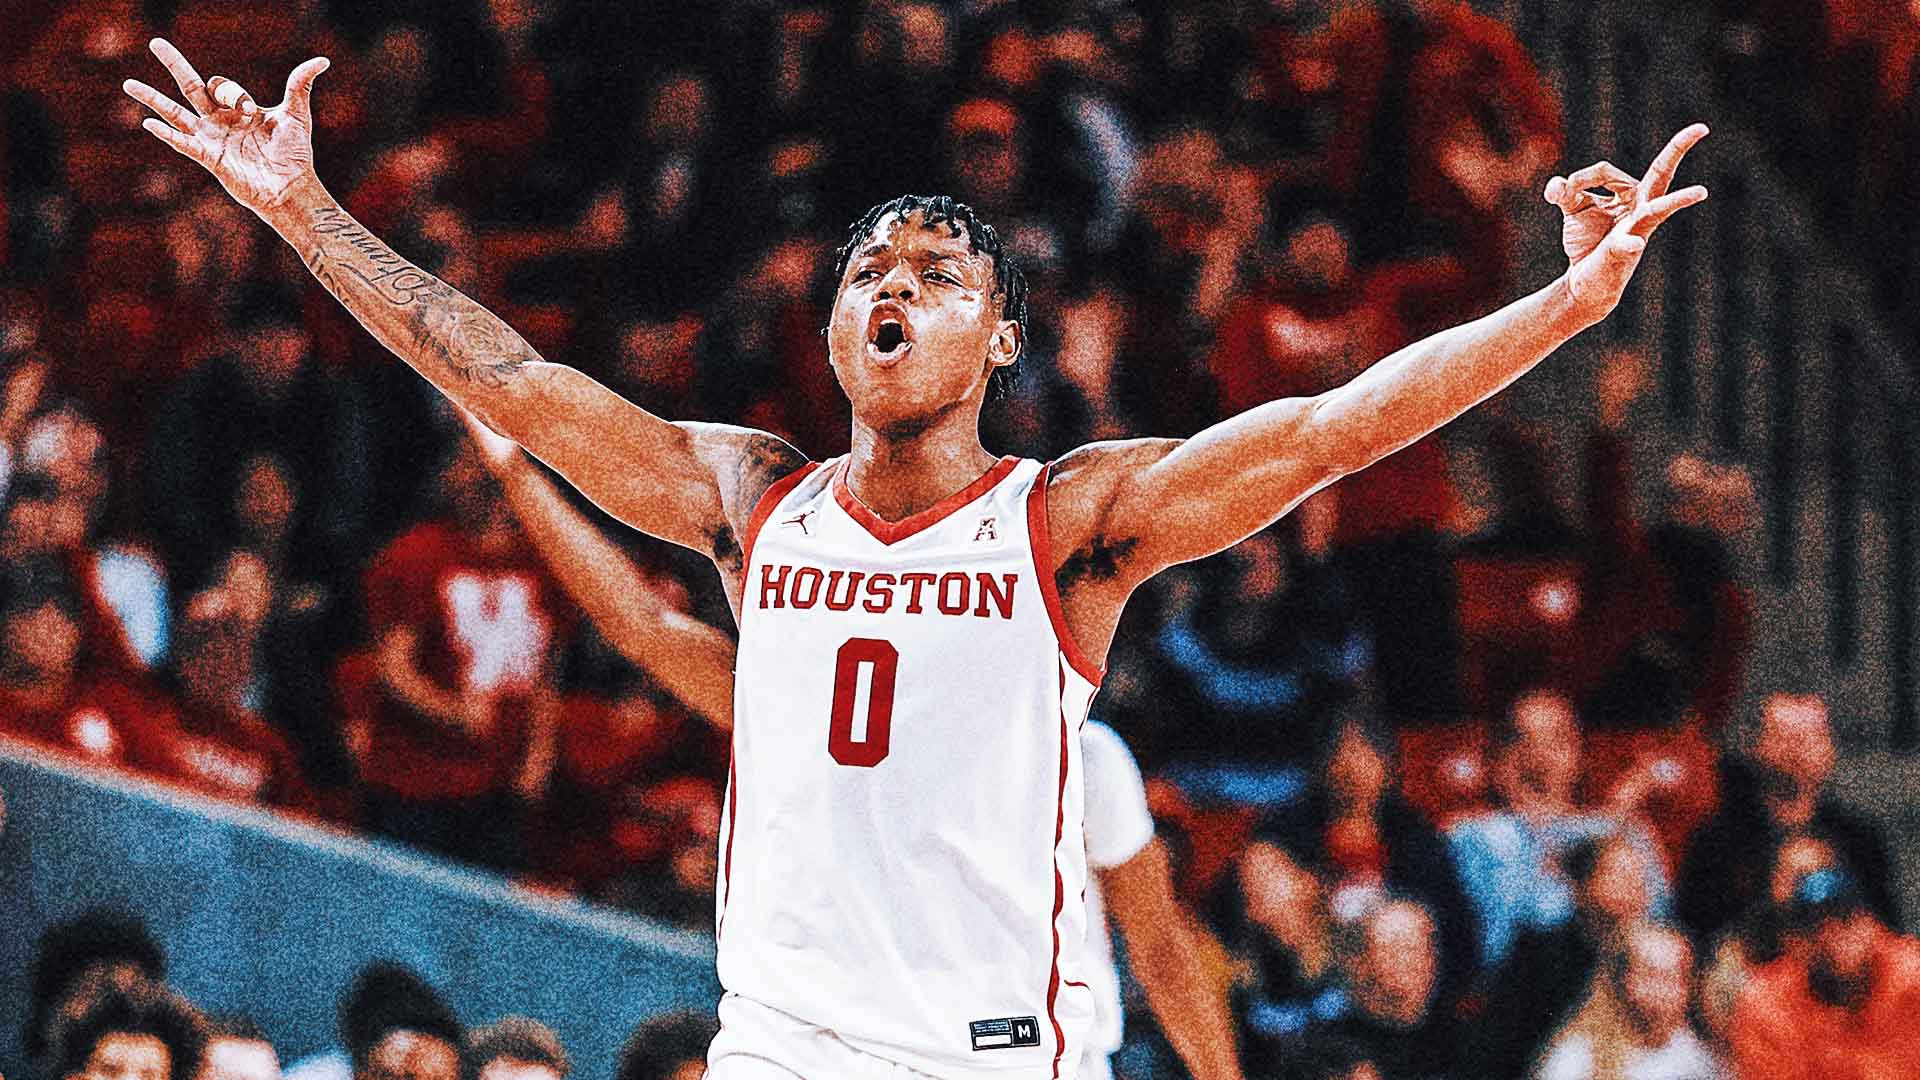 Houston is No. 1 in AP college basketball poll for first time since 1983